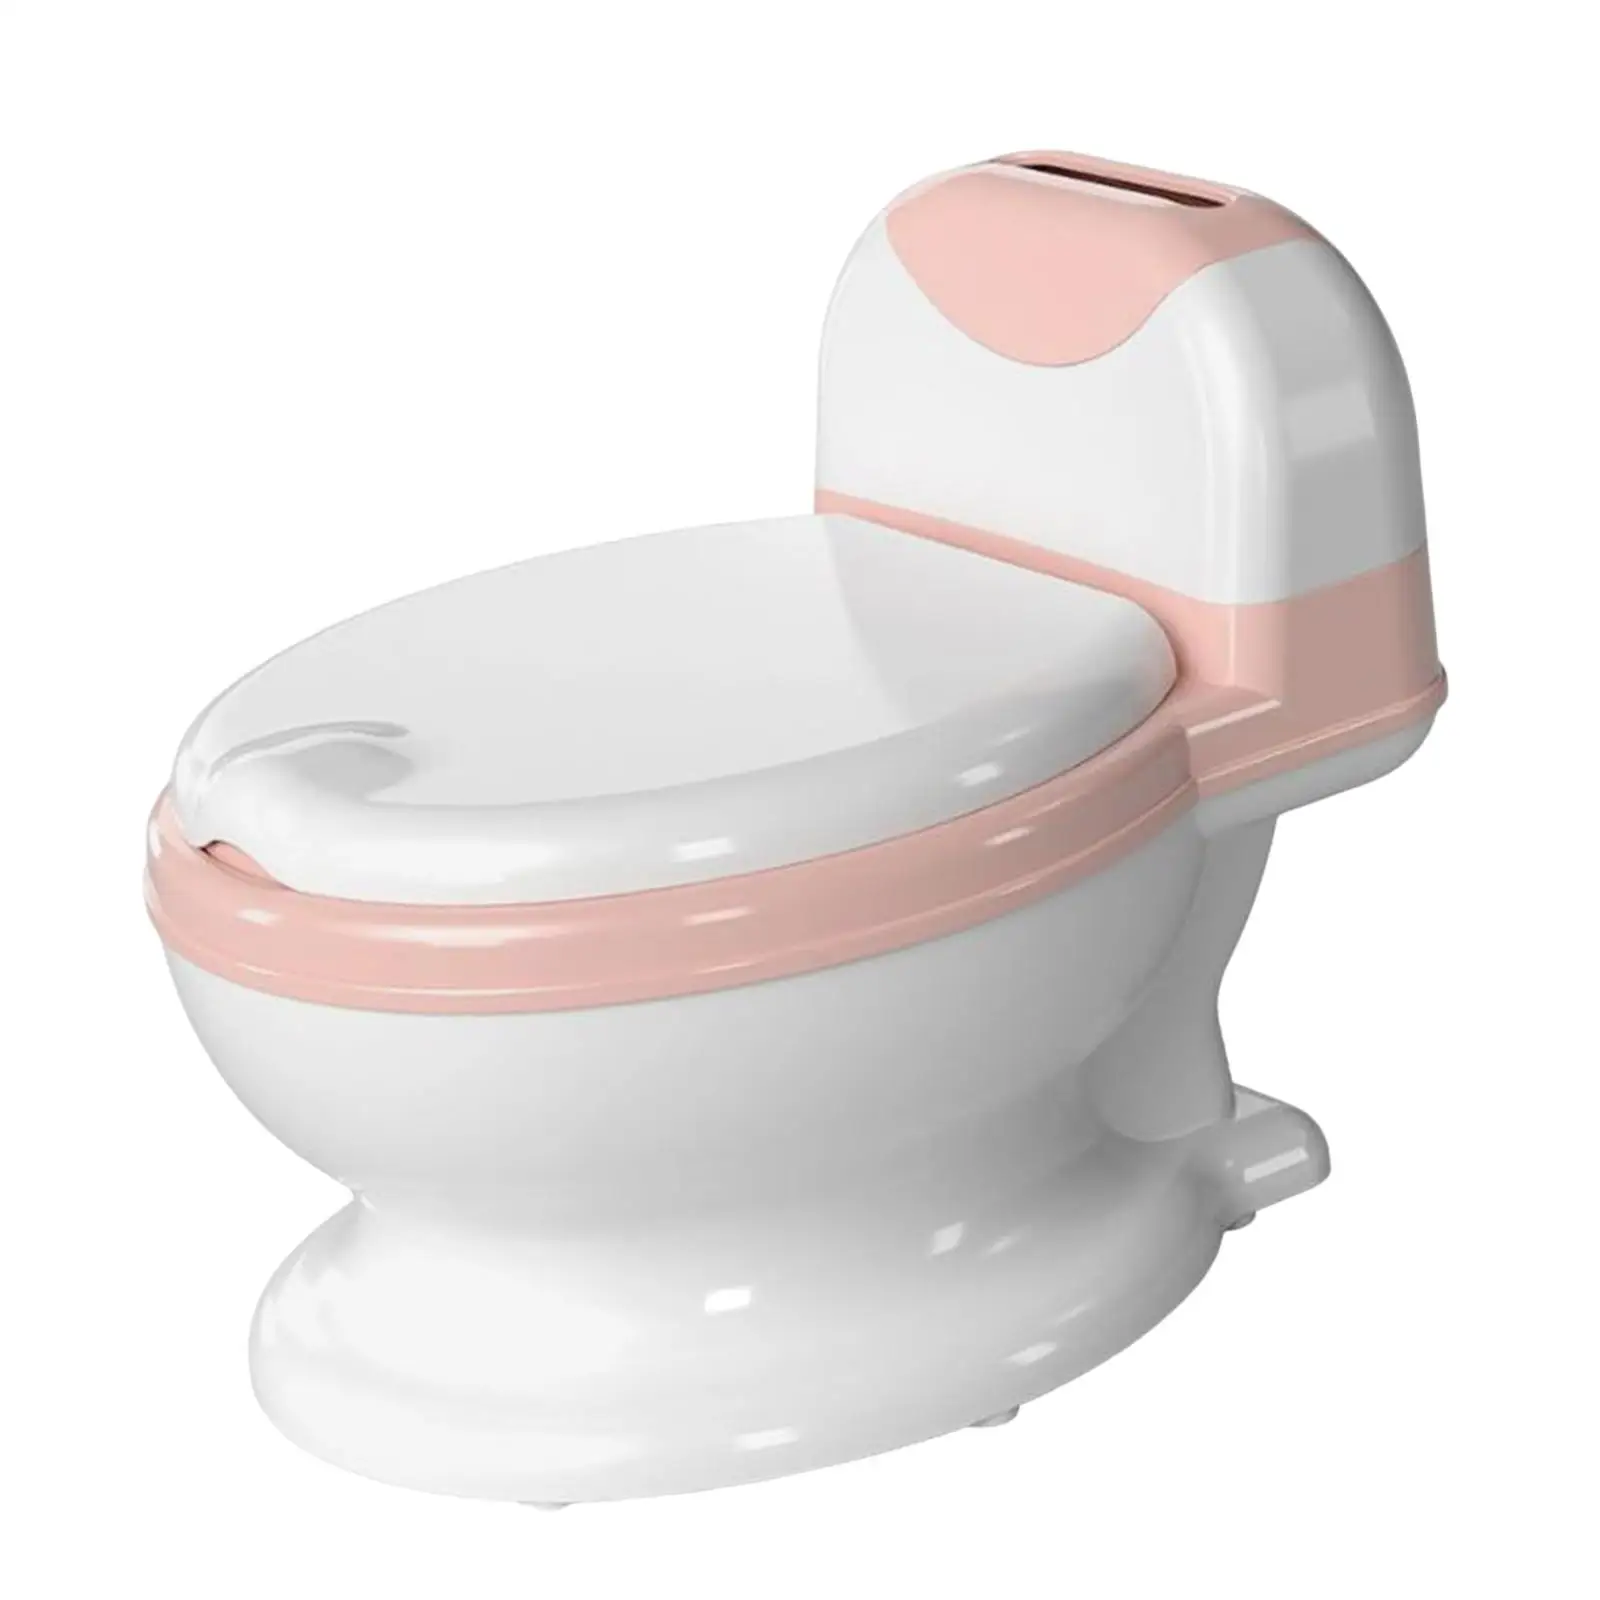 Potty Toilet Includes Cleaning Brush Comfortable Infants Toilet Seat Realistic Toilet for Travel Infants Girls Boys